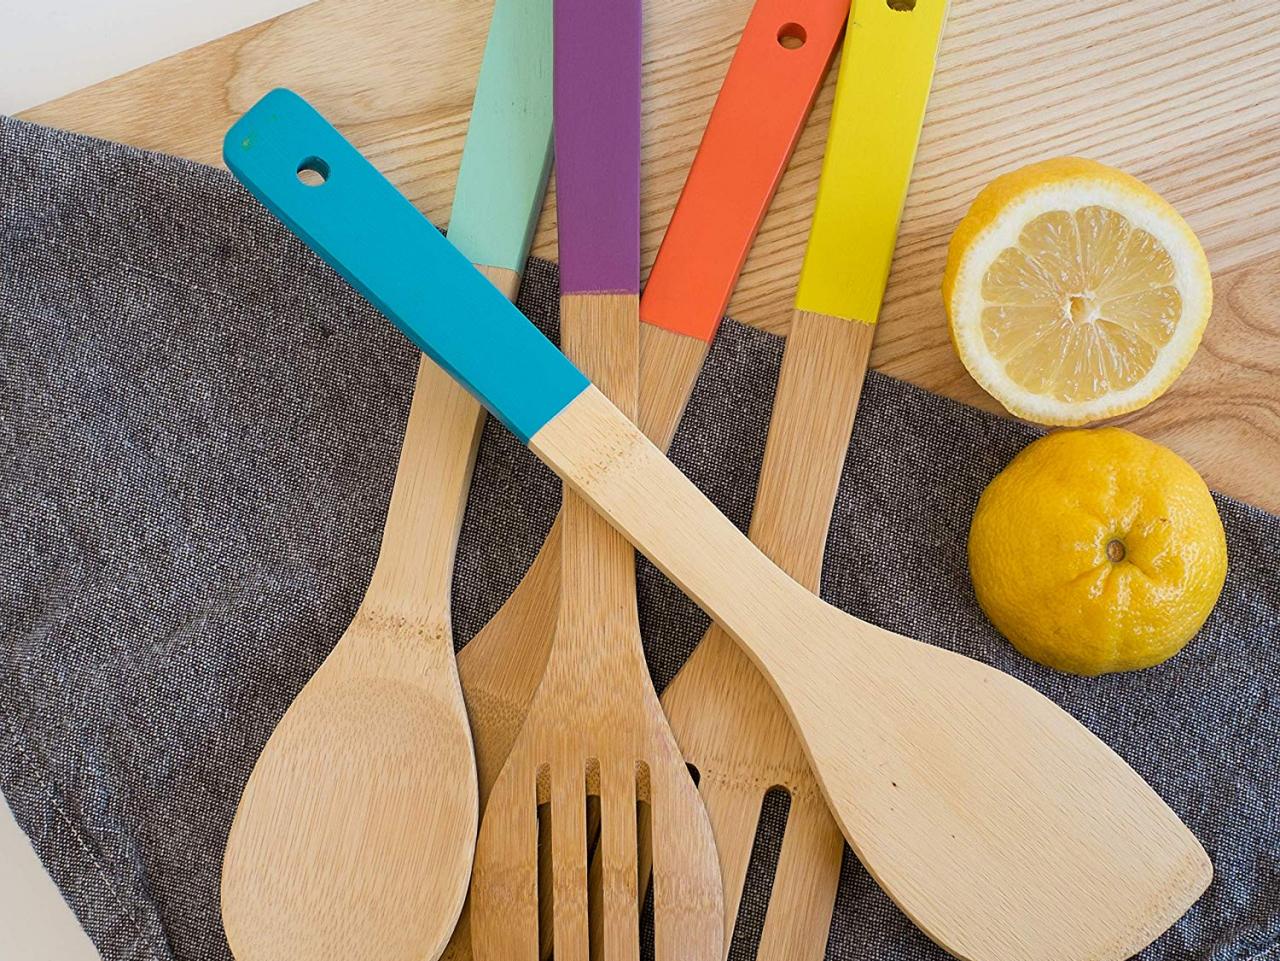 https://food.fnr.sndimg.com/content/dam/images/food/products/2019/3/14/rx_bamboo-utensils-set-of-5-multi-color.jpeg.rend.hgtvcom.1280.960.suffix/1552595126569.jpeg